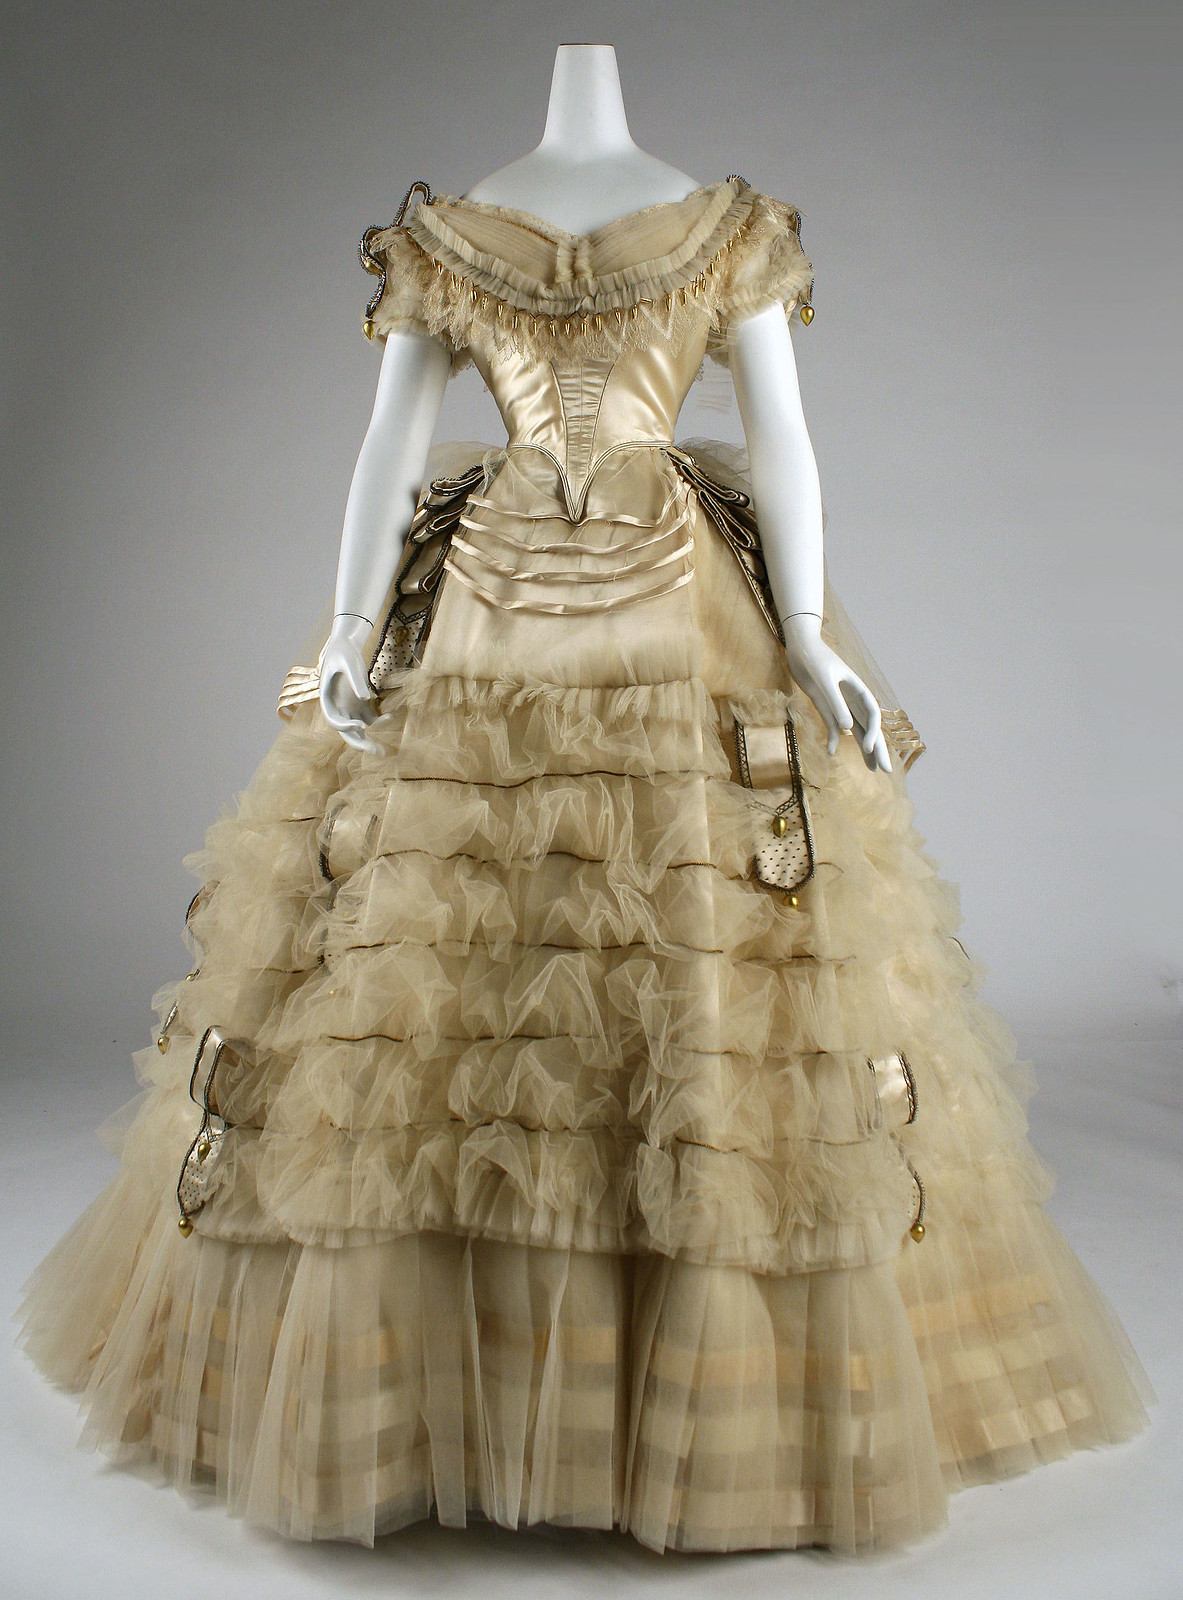 1860 Ball gown. French. Emile Pingat. Silk. metmuseum